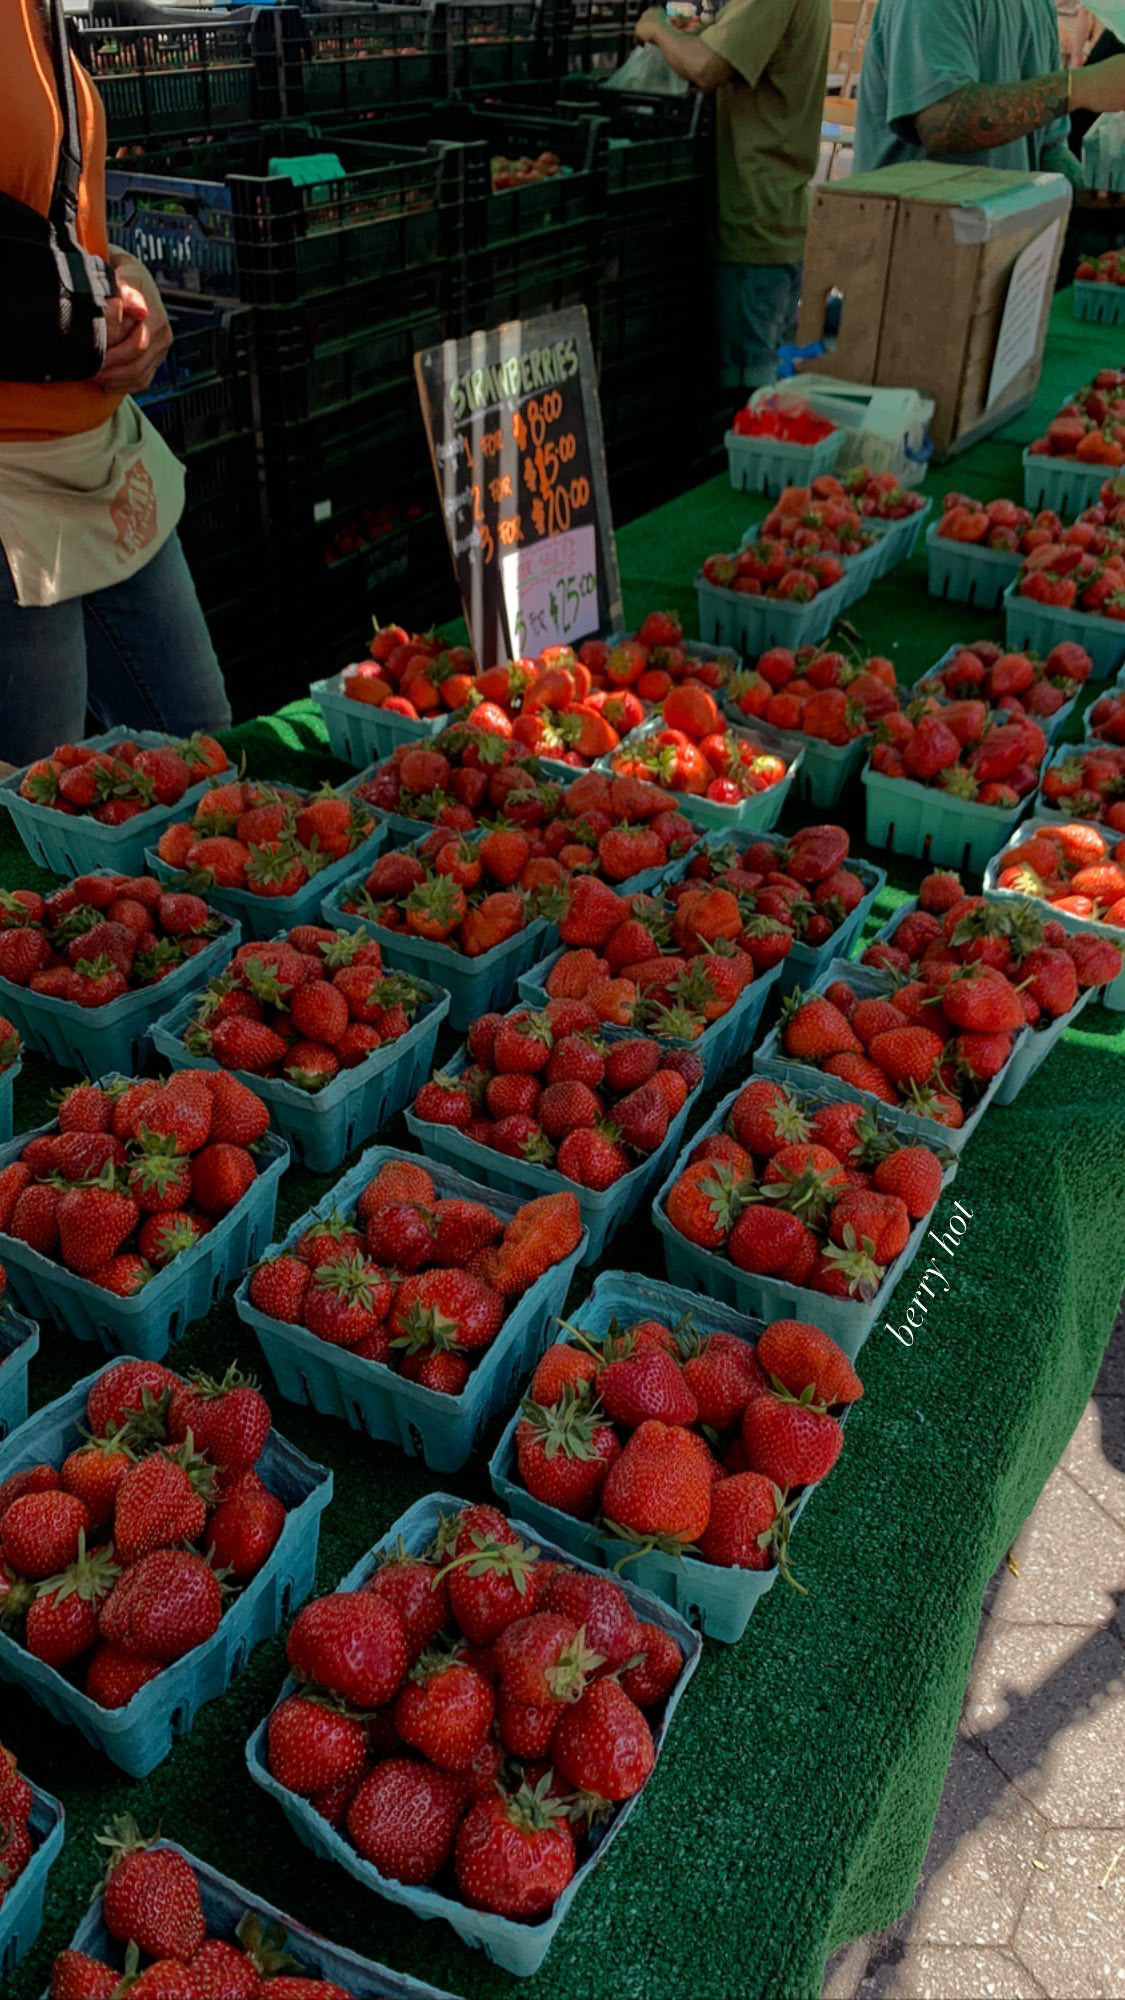 Strawberries at the farmers market at Union Square.